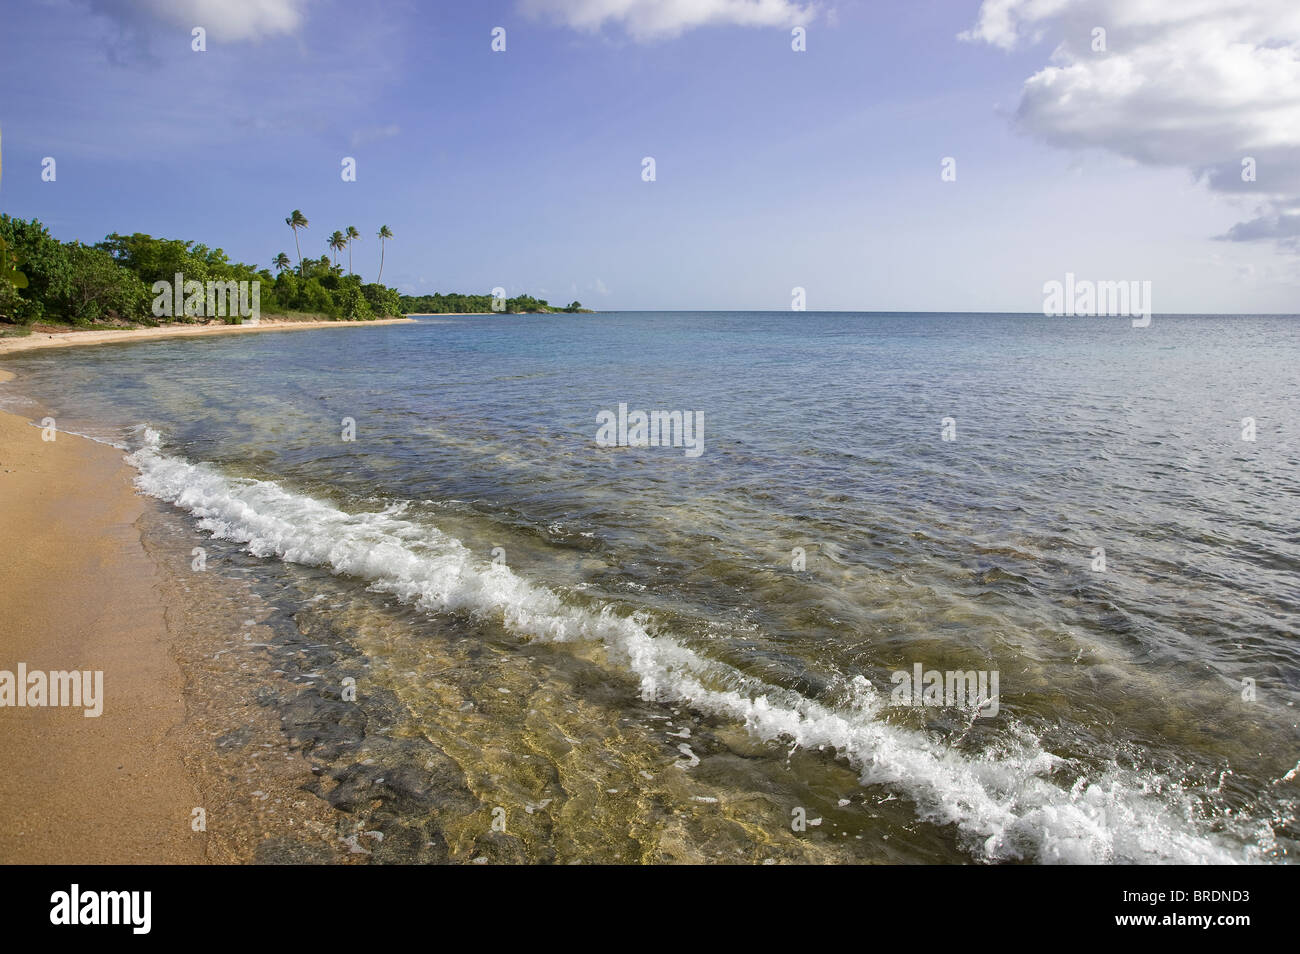 Surf, Waves & Foam On Isolated Deserted Beach, Vieques Puerto Rico Stock Photo